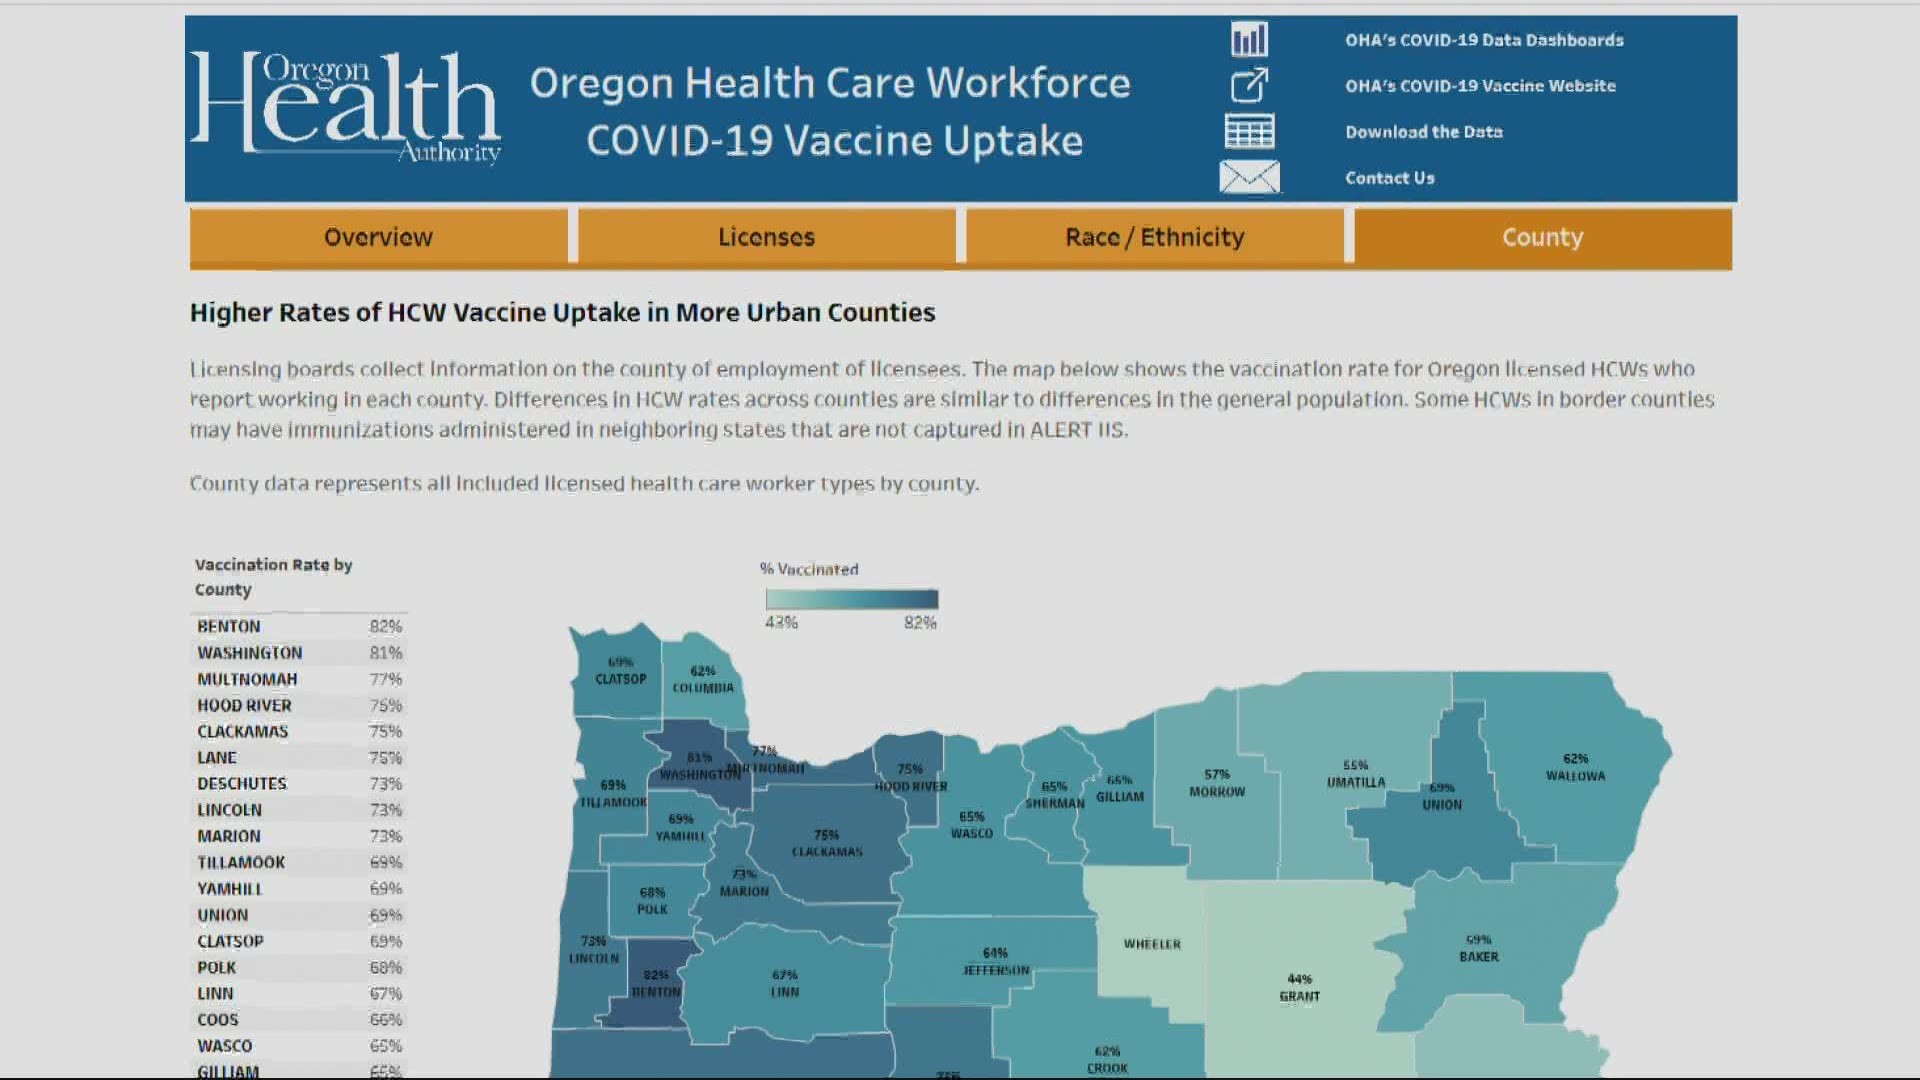 New data from the Oregon Health Authority shows vaccination rates vary widely across Oregon health care professions.